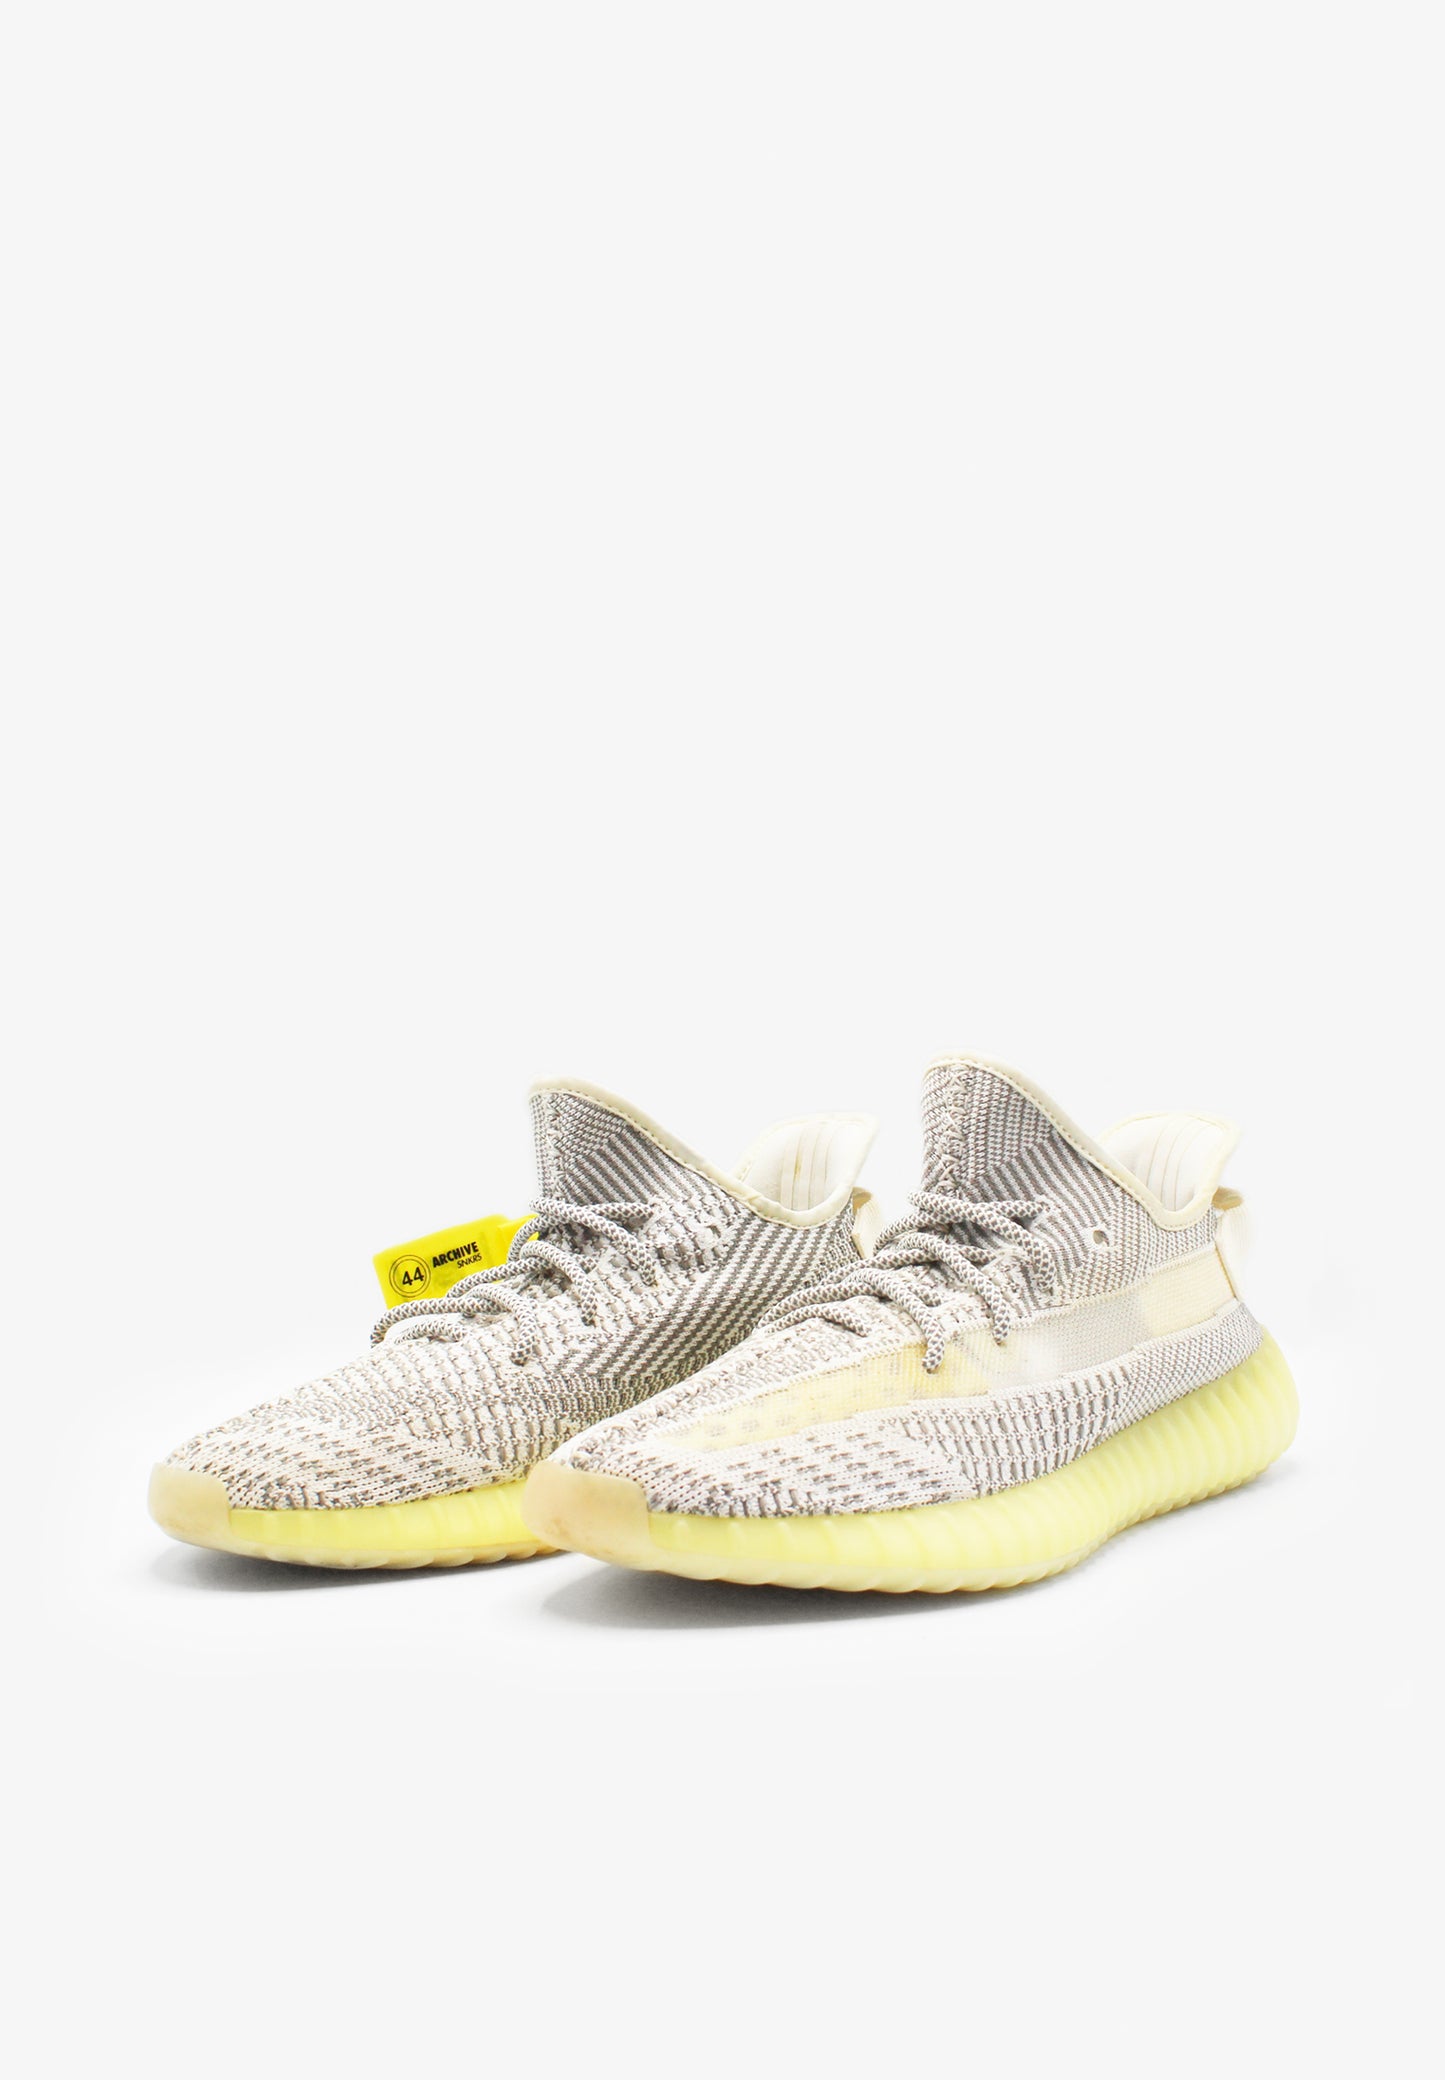 ARCHIVE SNEAKRS | SNEAKERS YEEZY 350 V2 STATIC TALLA 44.5